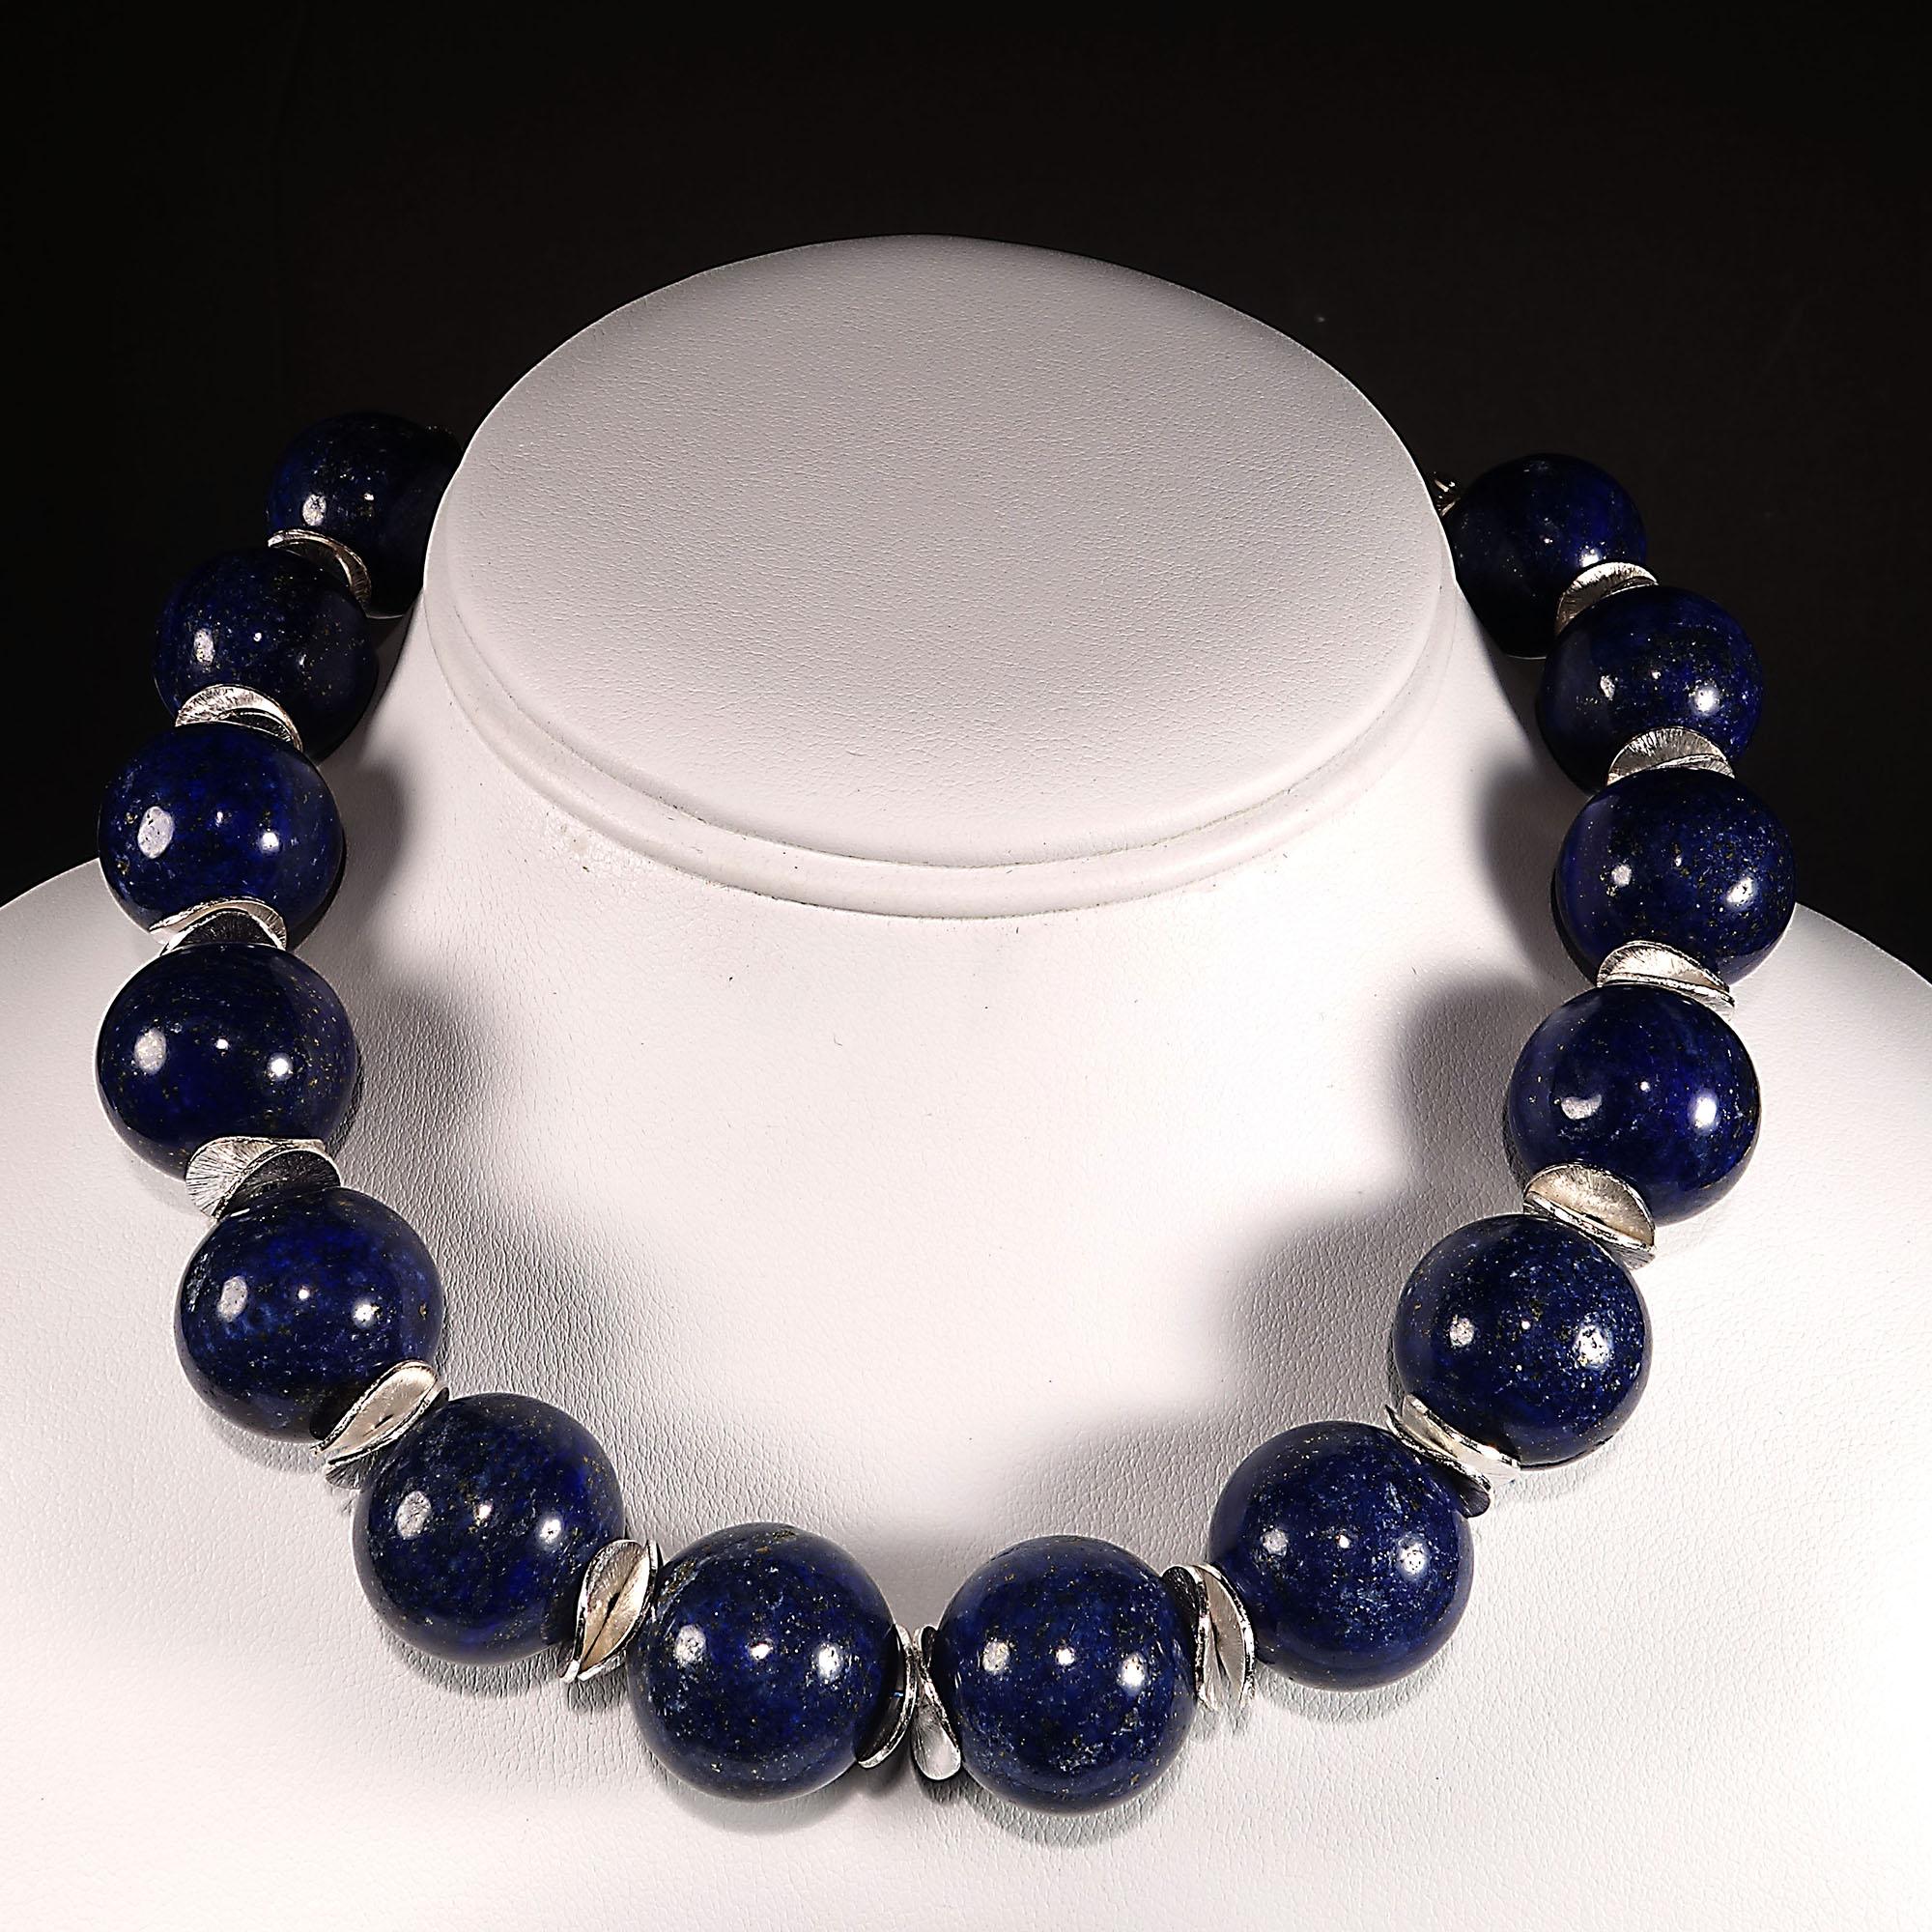 Bead AJD Choker Necklace of Large Lapis Lazuli Spheres with Silver Accents